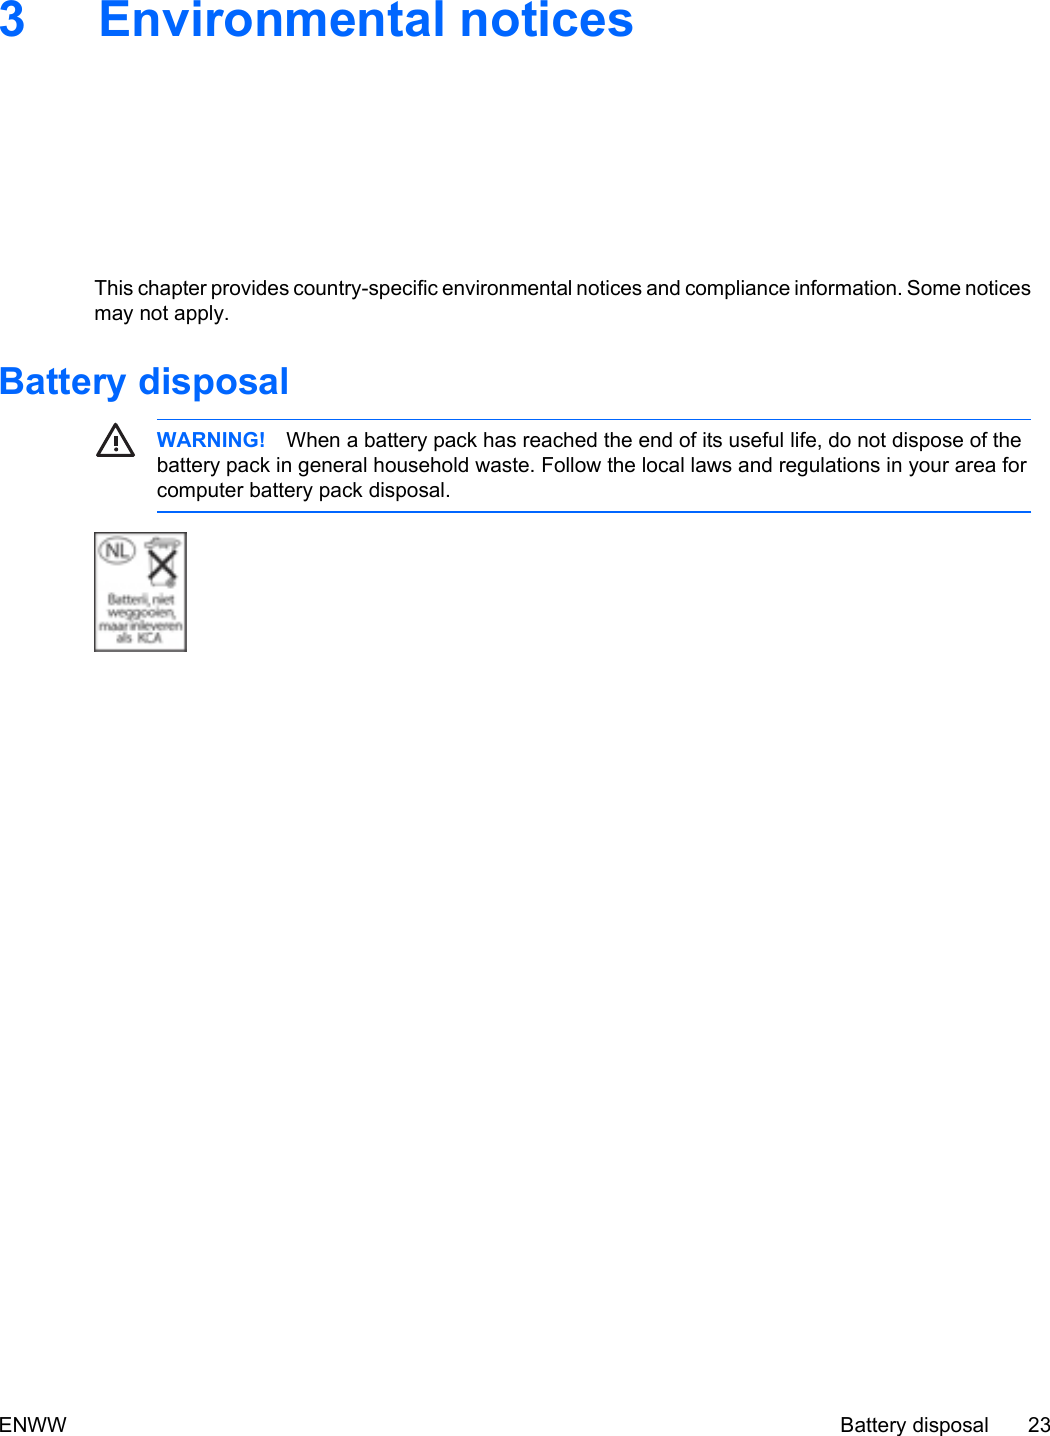 3 Environmental noticesThis chapter provides country-specific environmental notices and compliance information. Some noticesmay not apply.Battery disposalWARNING! When a battery pack has reached the end of its useful life, do not dispose of thebattery pack in general household waste. Follow the local laws and regulations in your area forcomputer battery pack disposal.ENWW Battery disposal 23